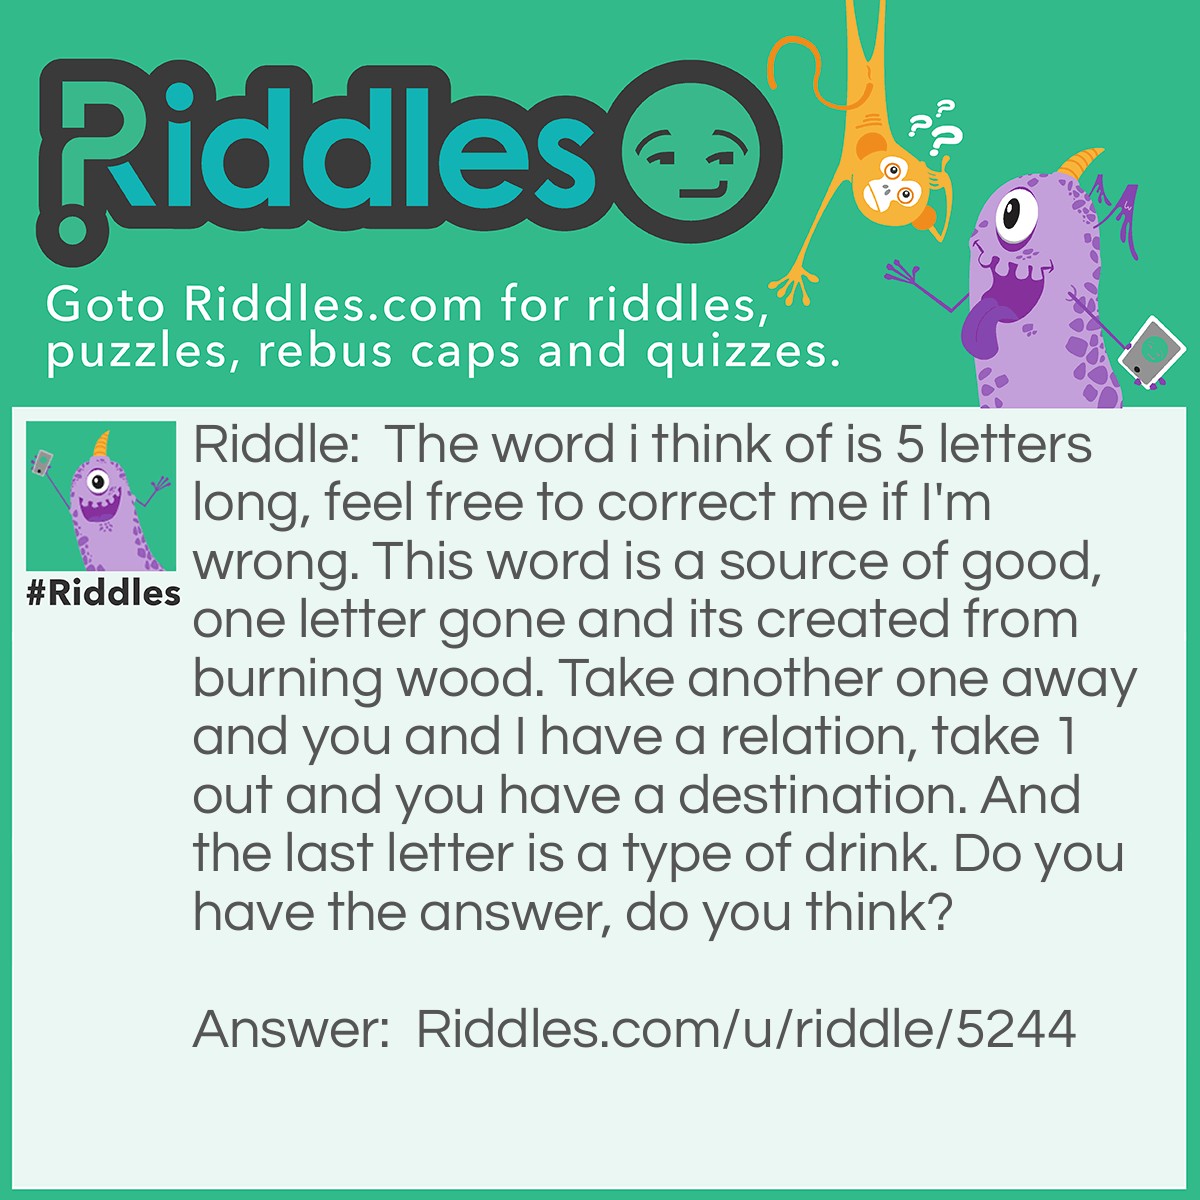 Riddle: The word I think of is 5 letters long, feel free to correct me if I'm wrong. This word is a source of good, one letter is gone and it's created from burning wood. Take another one away and you and I have a relation, take 1 out and you have a destination. And the last letter is a type of drink. Do you have the answer, do you think? Answer: Wheat. Marvelous Wheat. Wheat, heat, eat, at, t. How convenient. As for a good, wheat is a good. Heat is created from burning wood. A relation both you and I have is well, we both have to eat. At, is a destination. And T or Tea is a drink. If you guessed right, pat yourself on the back, if you didn't, keep trying I have faith in you!